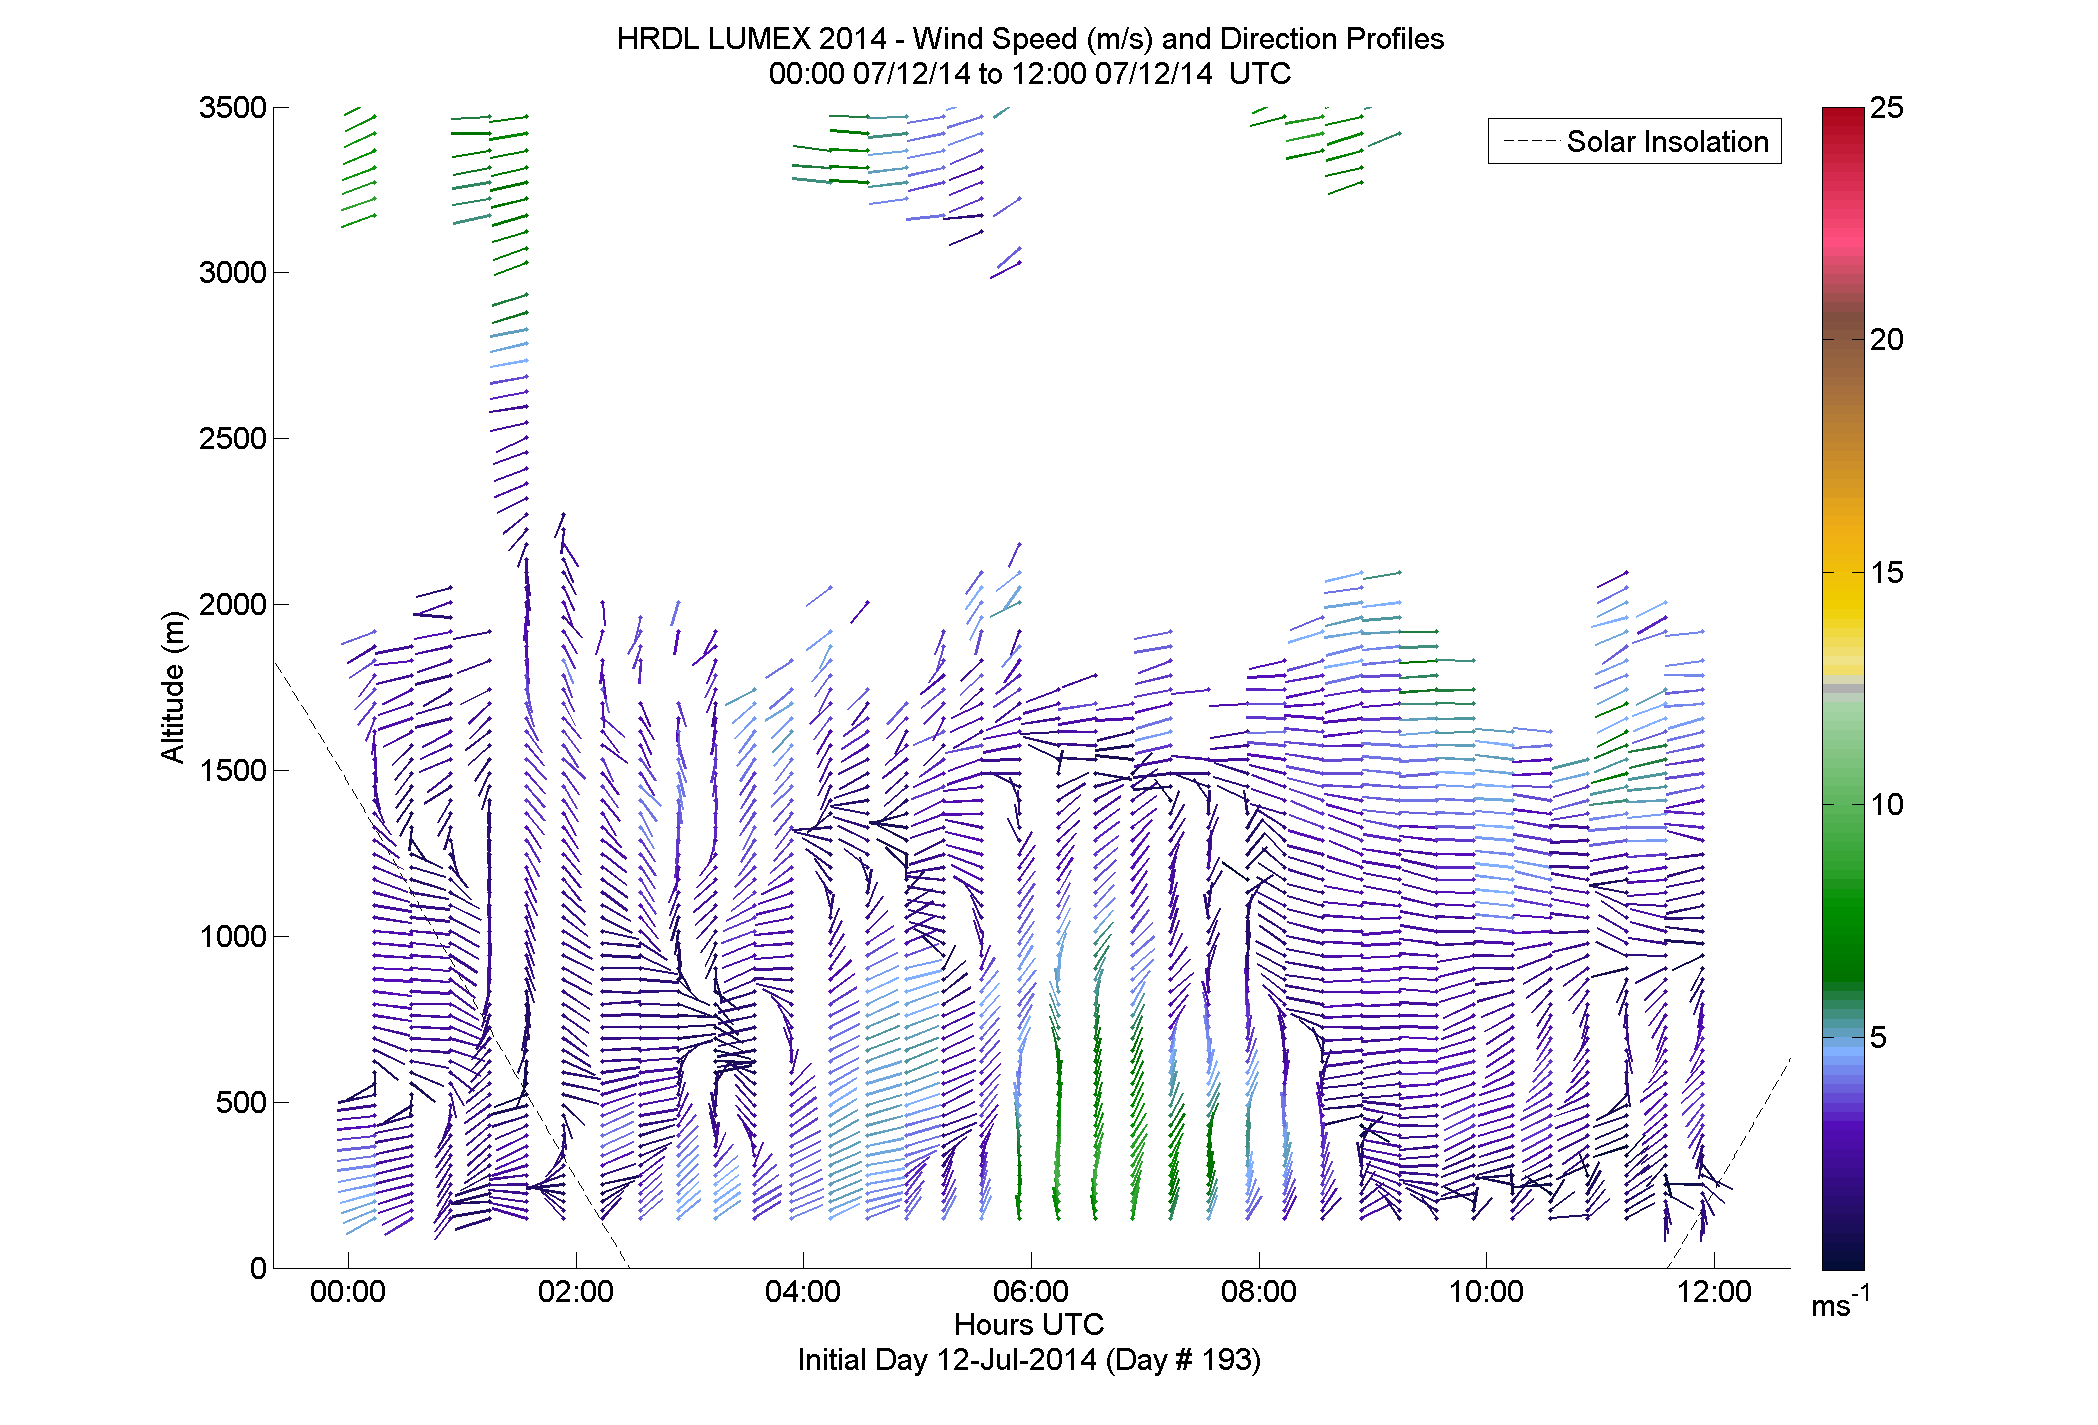 HRDL speed and direction profile - July 12 am